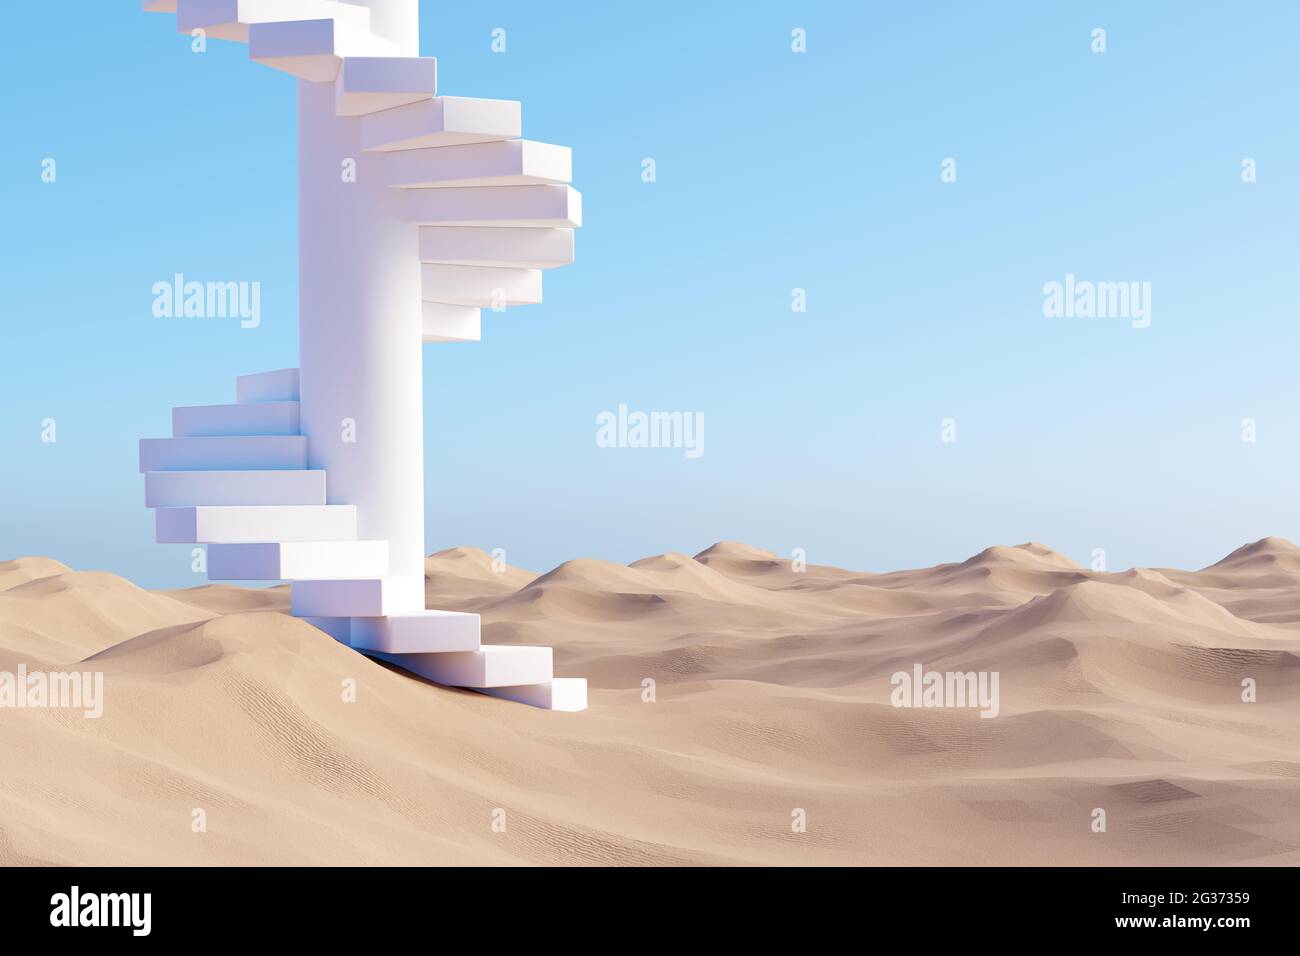 Surreal desert landscape with white spiral staircase on sand Stock Photo